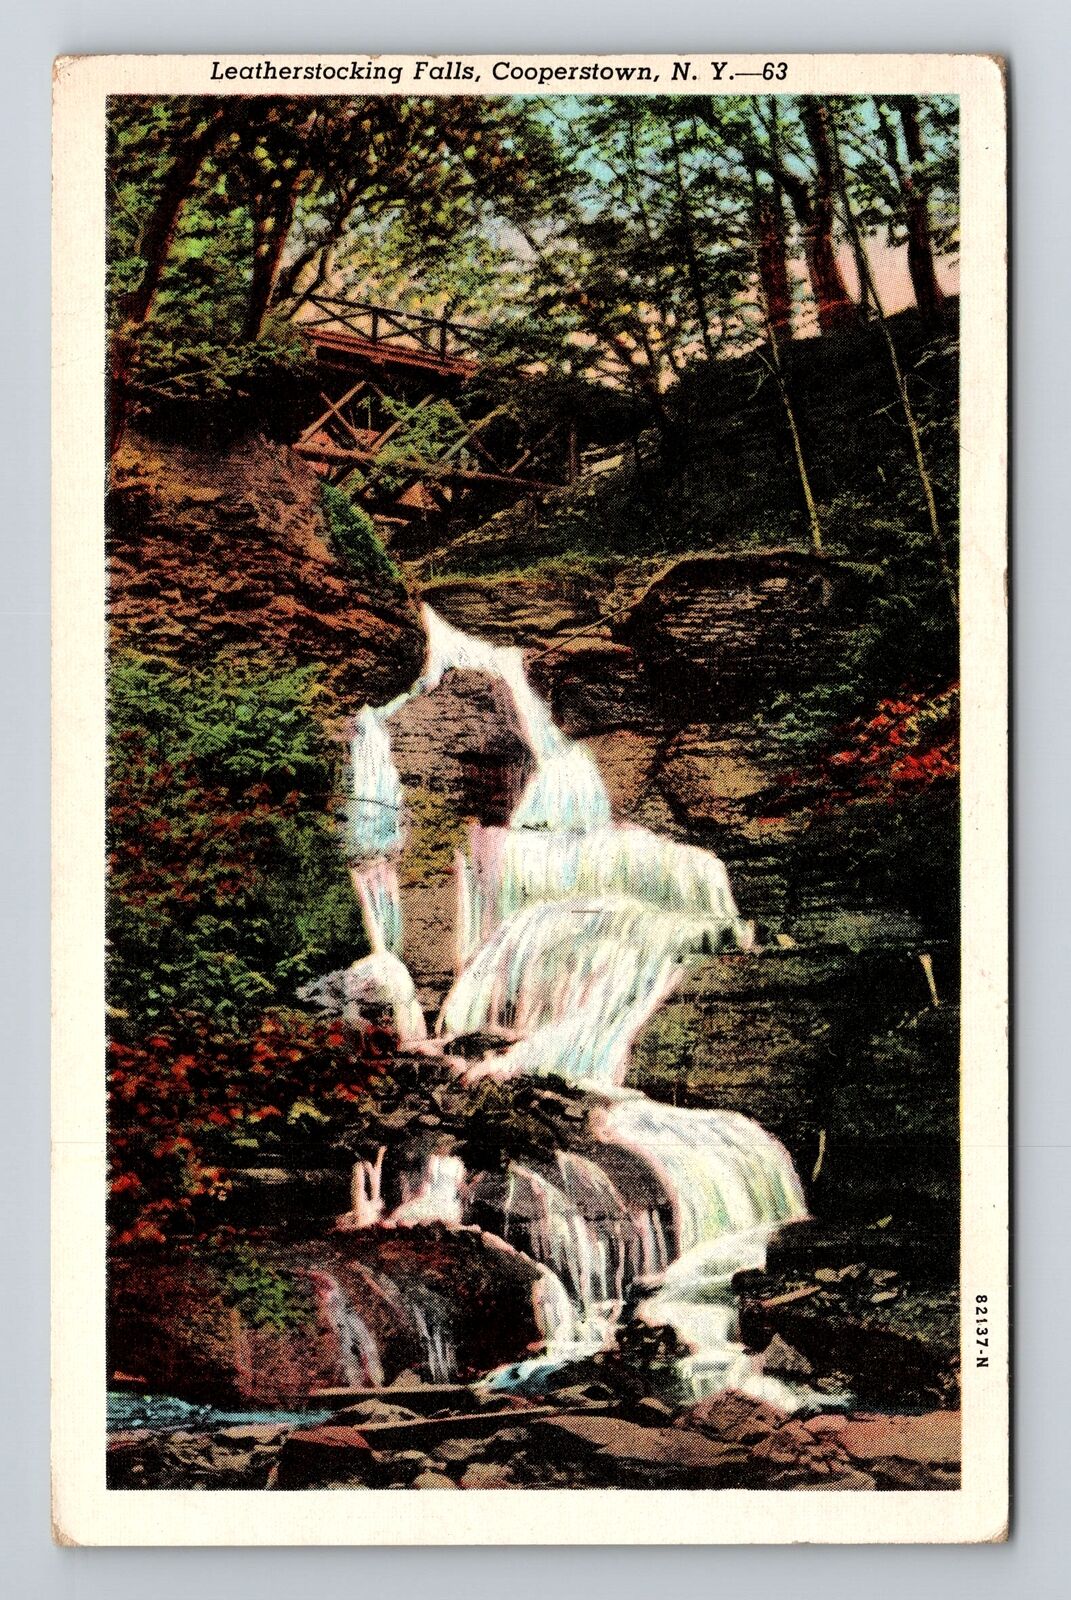 Cooperstown NY-New York, Leatherstocking Falls Vintage Souvenir Postcard